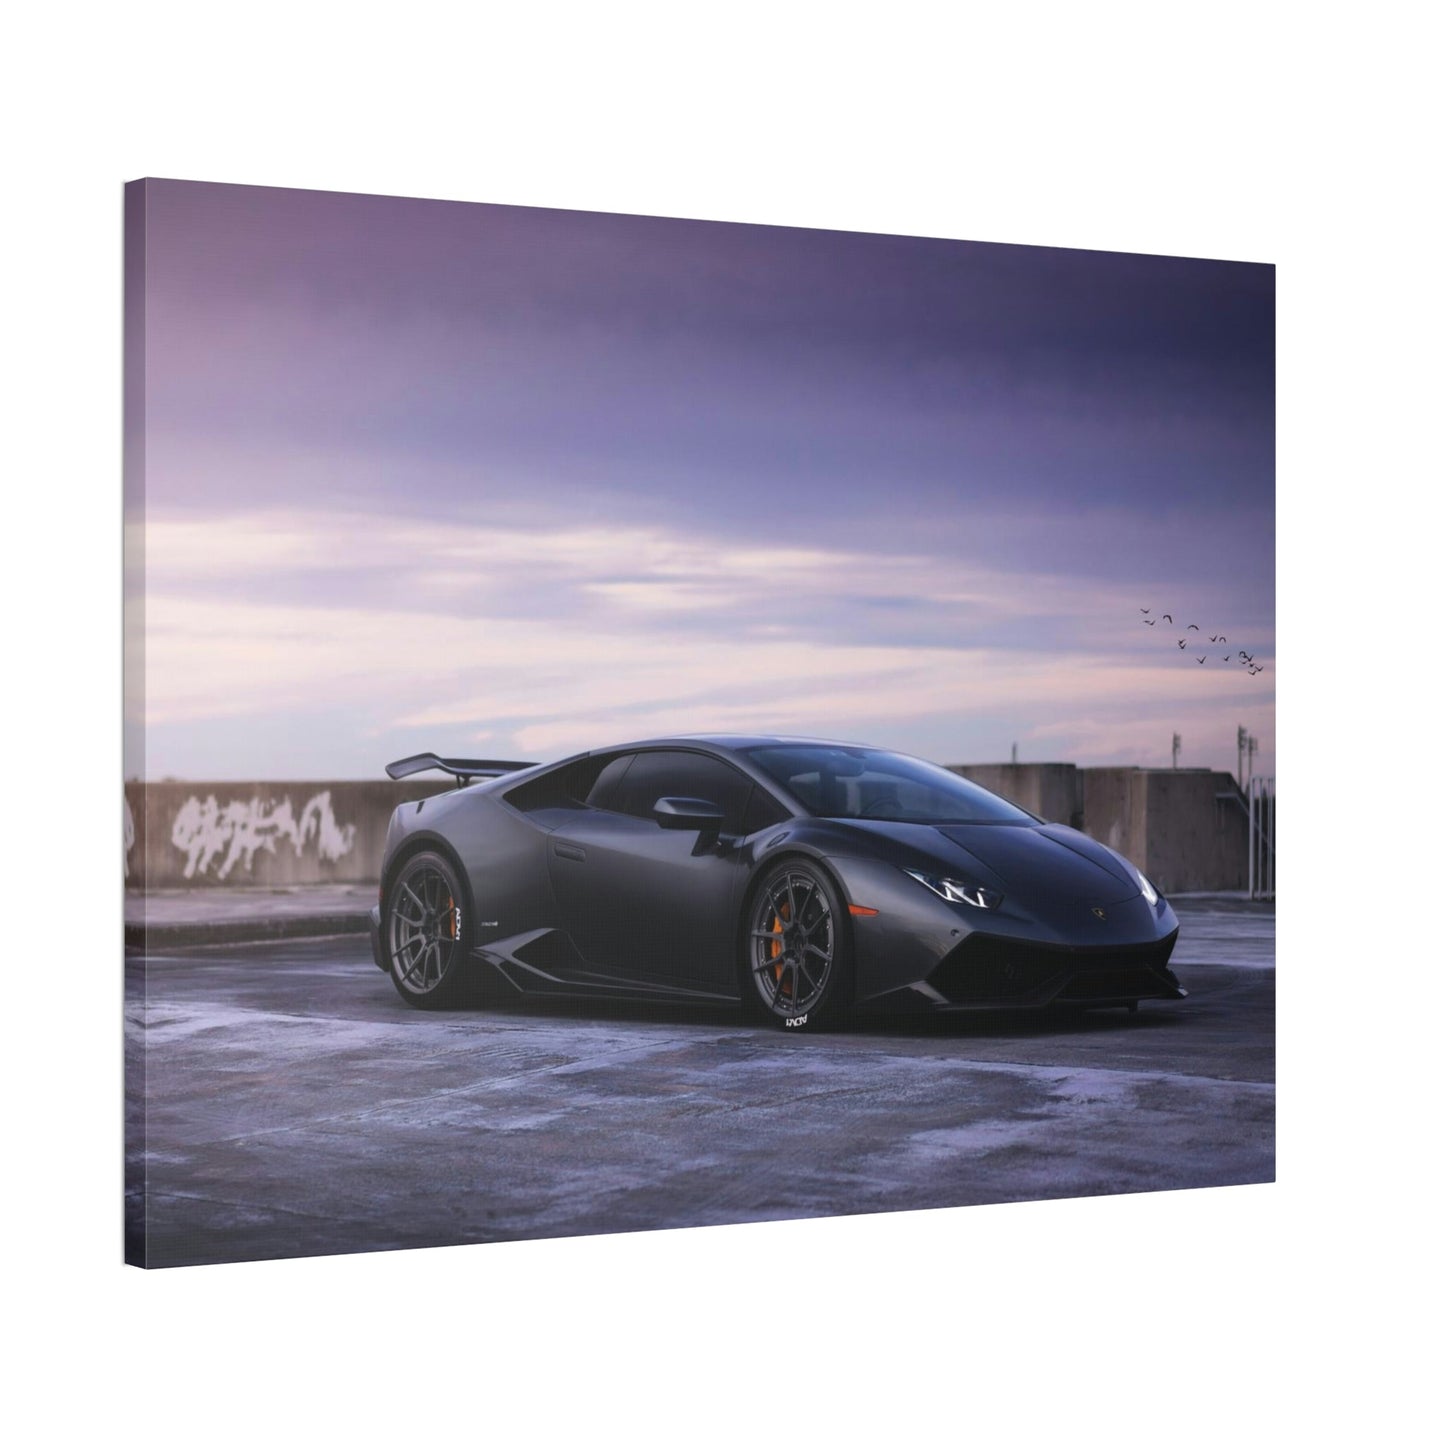 Racing into Luxury: Framed Lamborghini Canvas Print for Your Wall